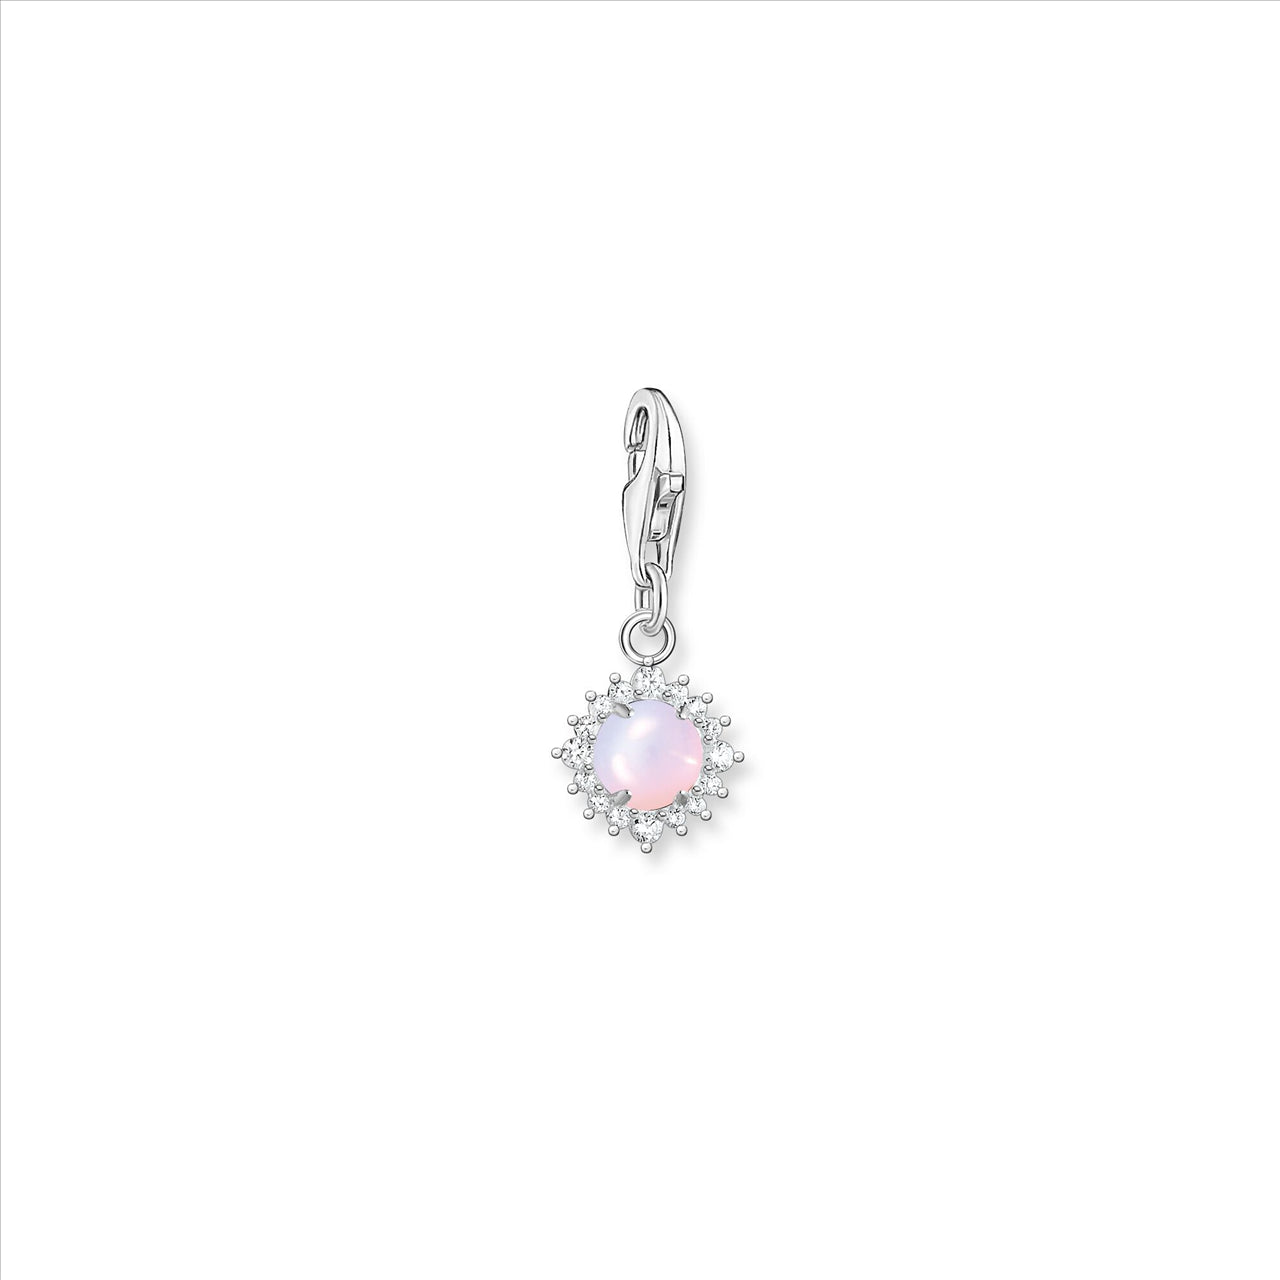 Thomas Sabo Charm Club Opal Opaque Colour With Cubic Zirconia Halo.